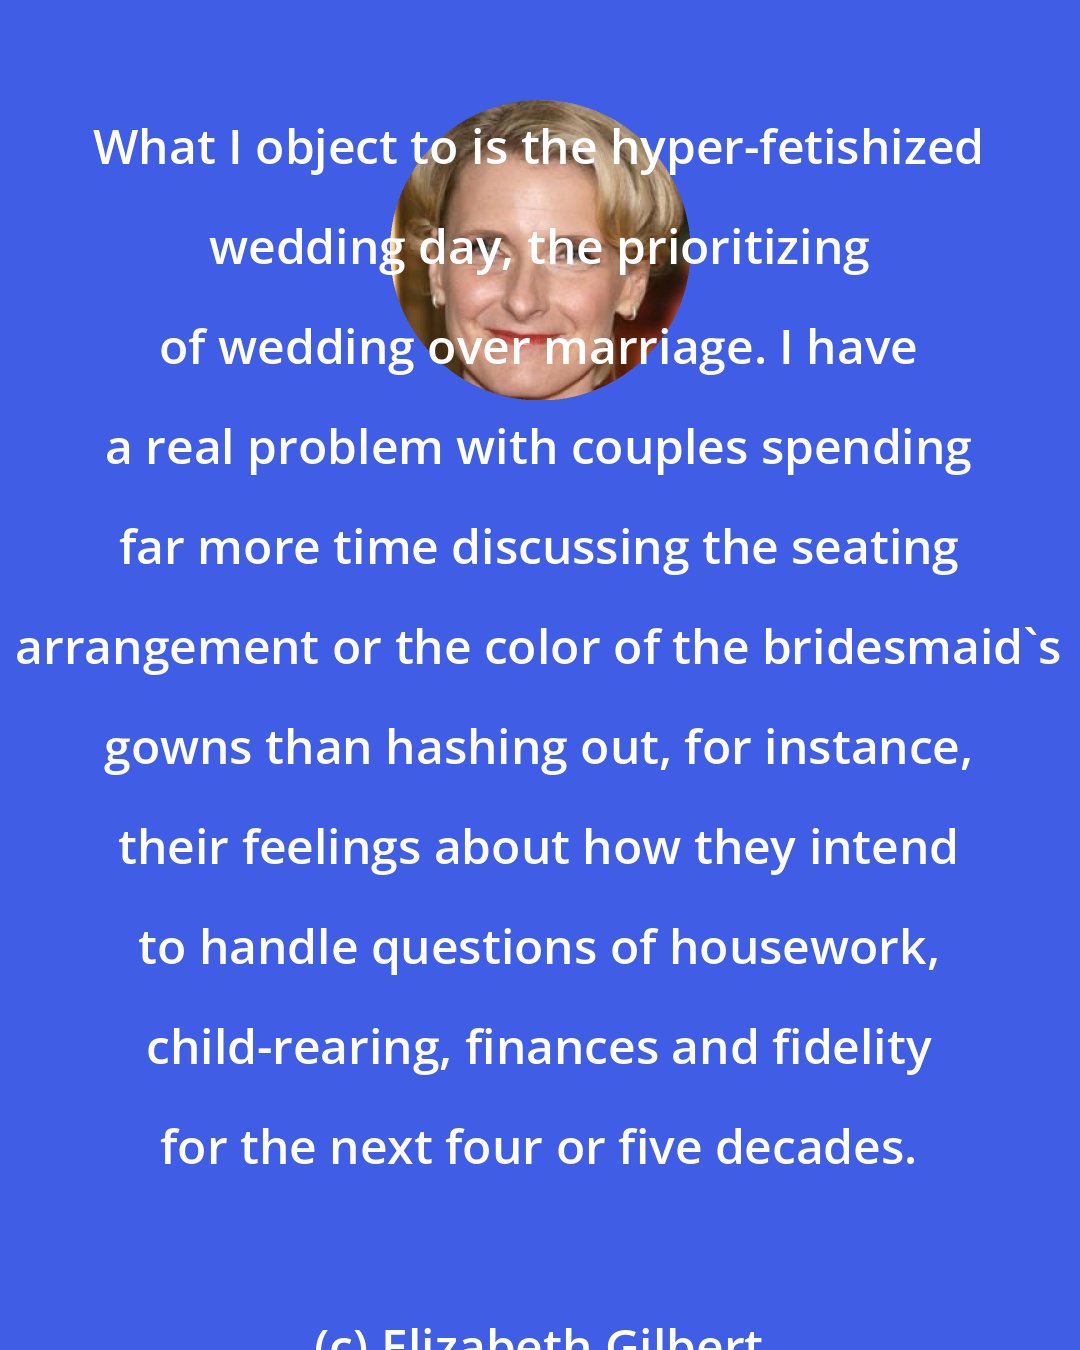 Elizabeth Gilbert: What I object to is the hyper-fetishized wedding day, the prioritizing of wedding over marriage. I have a real problem with couples spending far more time discussing the seating arrangement or the color of the bridesmaid's gowns than hashing out, for instance, their feelings about how they intend to handle questions of housework, child-rearing, finances and fidelity for the next four or five decades.